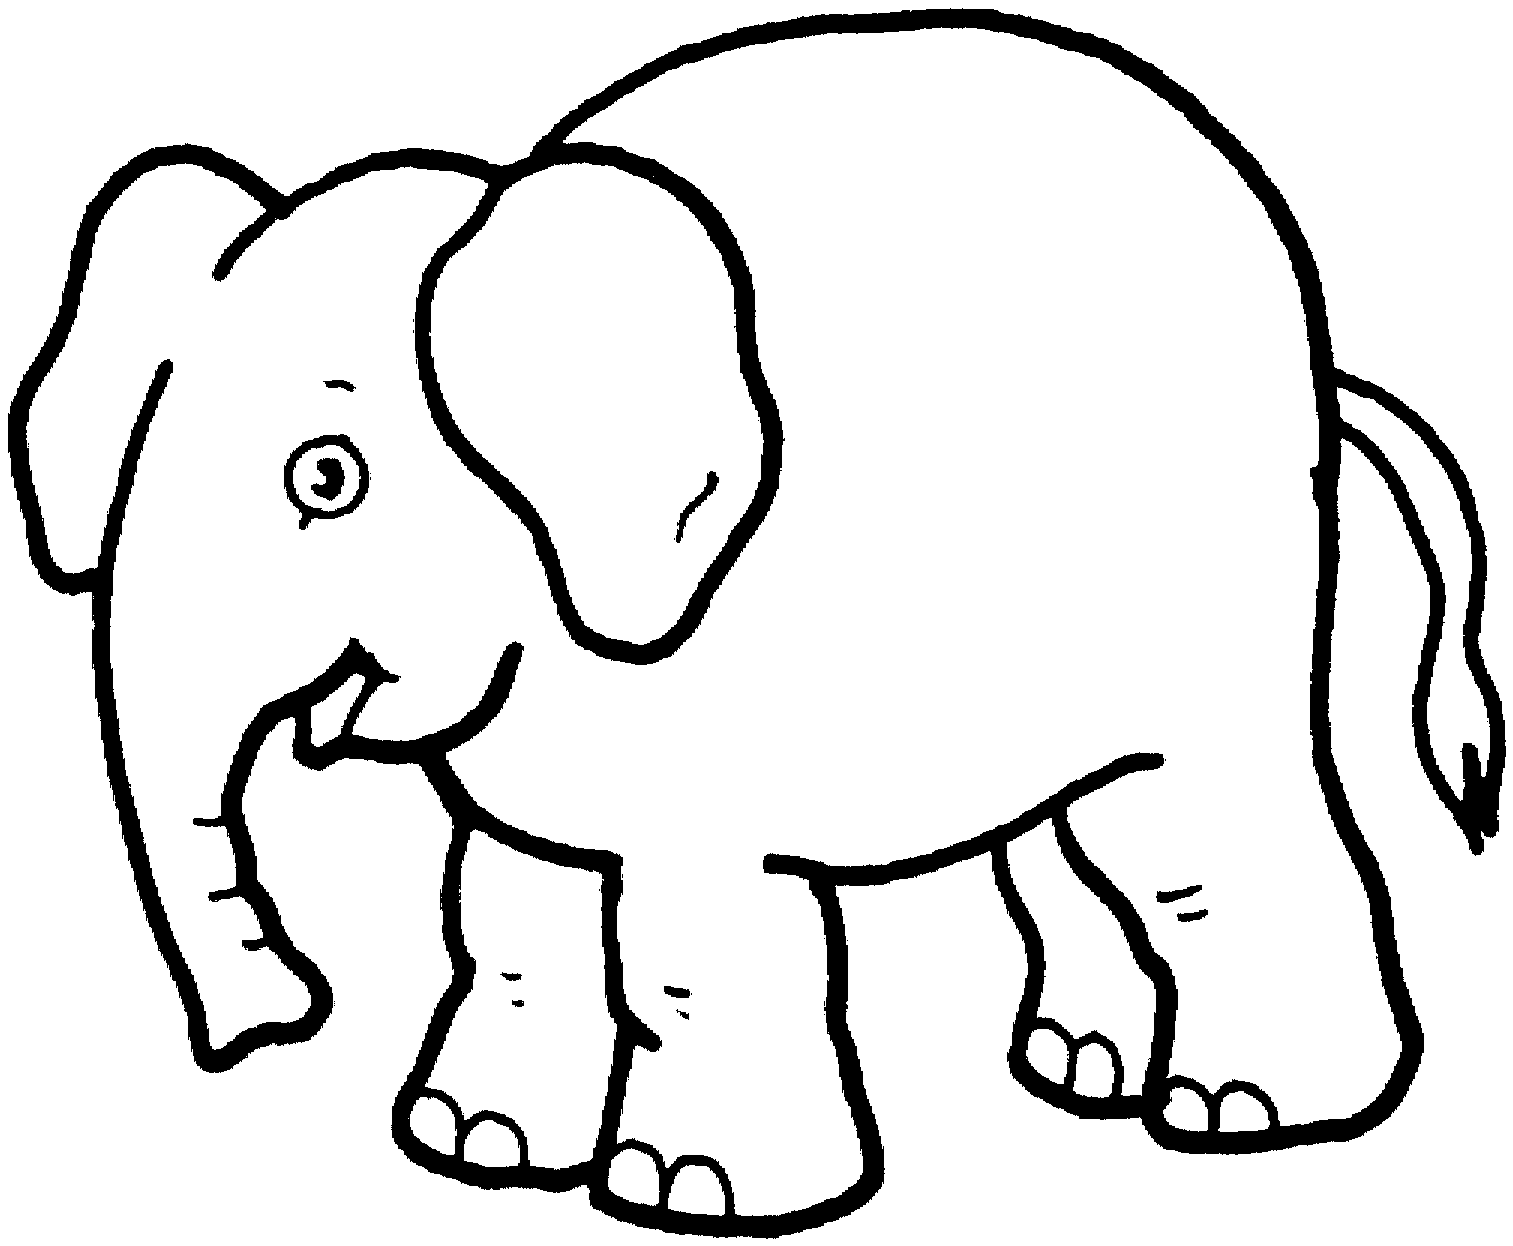 Elephant Line Drawings - Clipart library